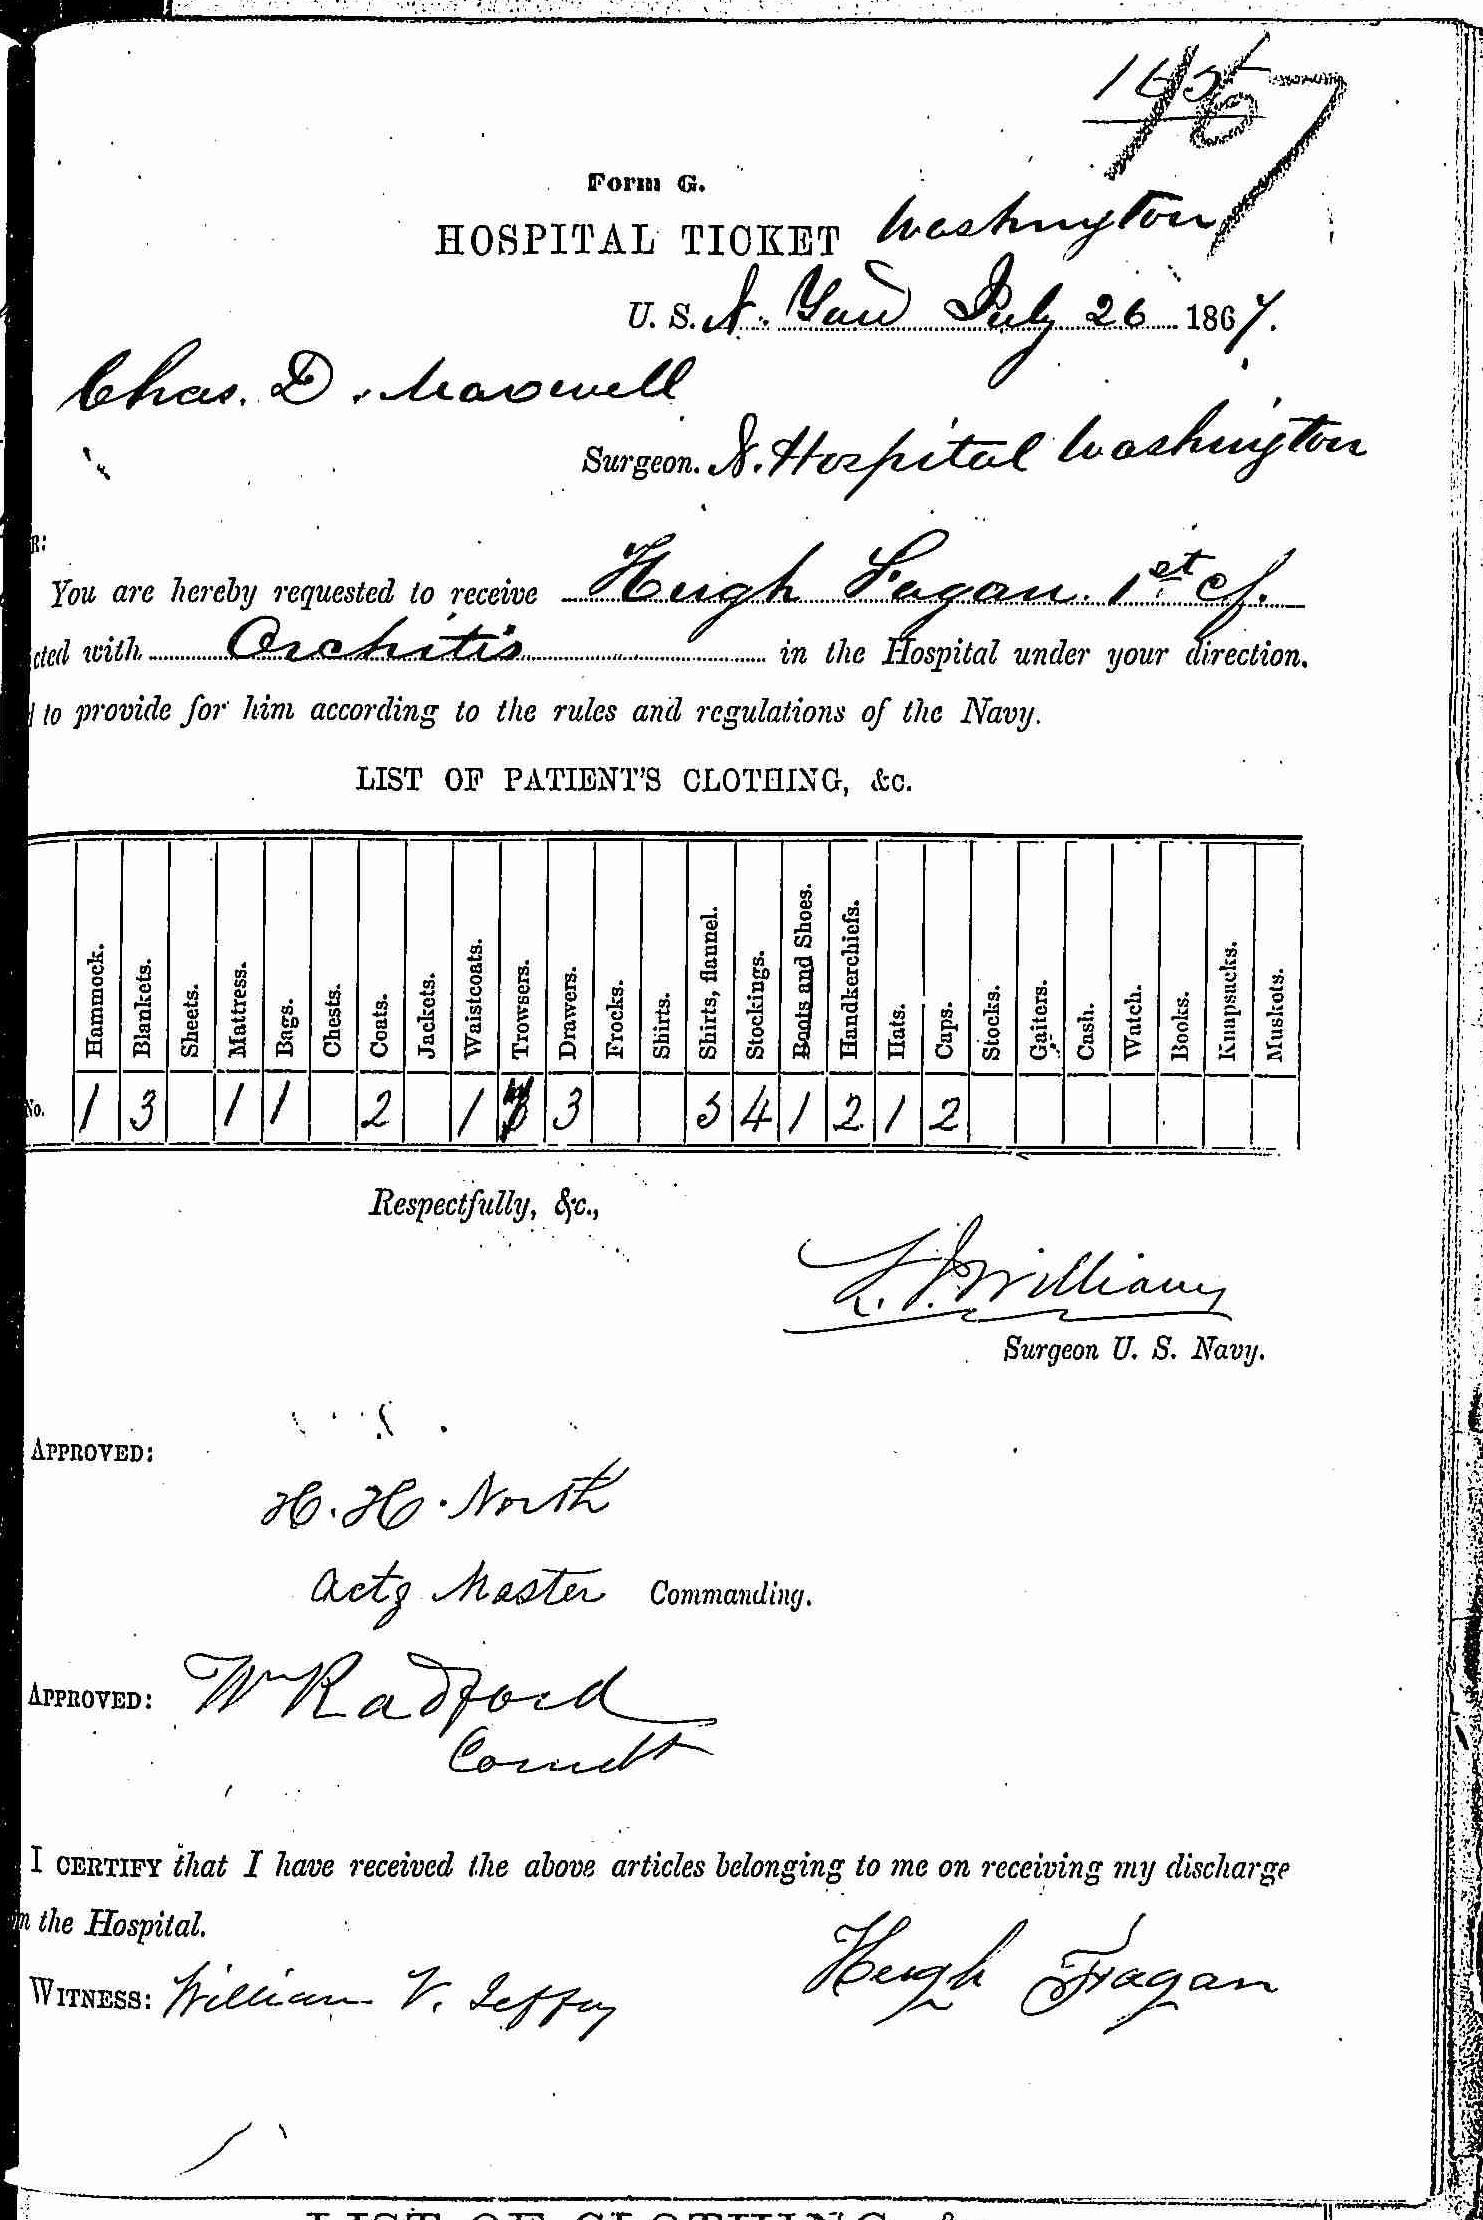 Entry for Hugh Fagan (page 1 of 2) in the log Hospital Tickets and Case Papers - Naval Hospital - Washington, D.C. - 1866-68